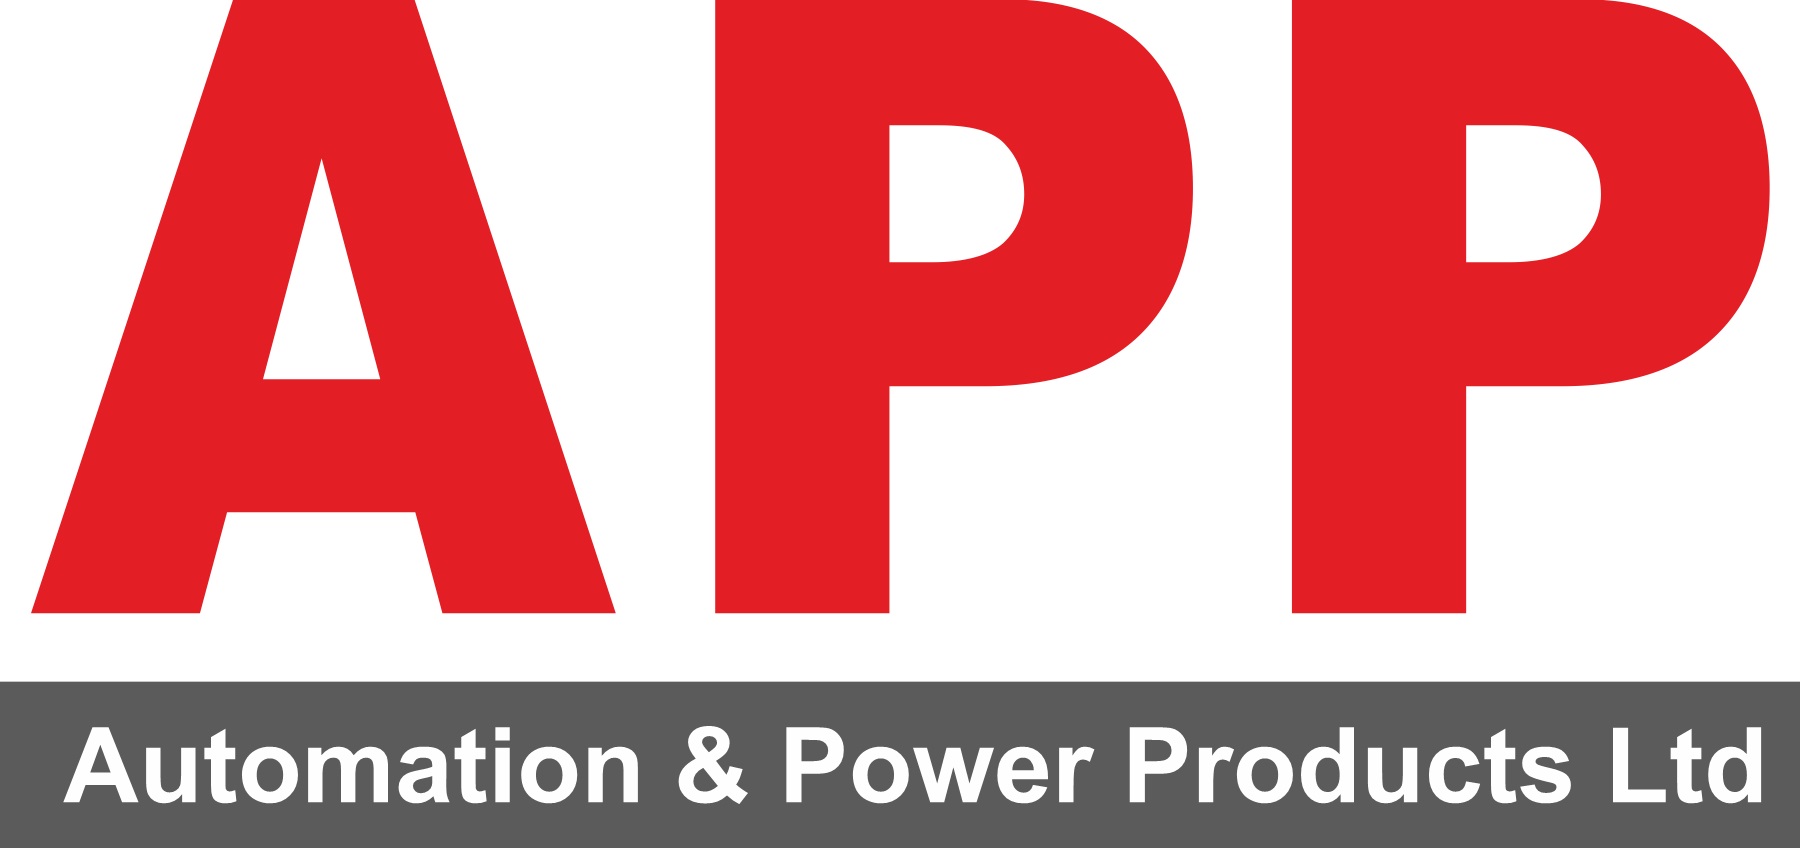 Automation Power Products Ltd.